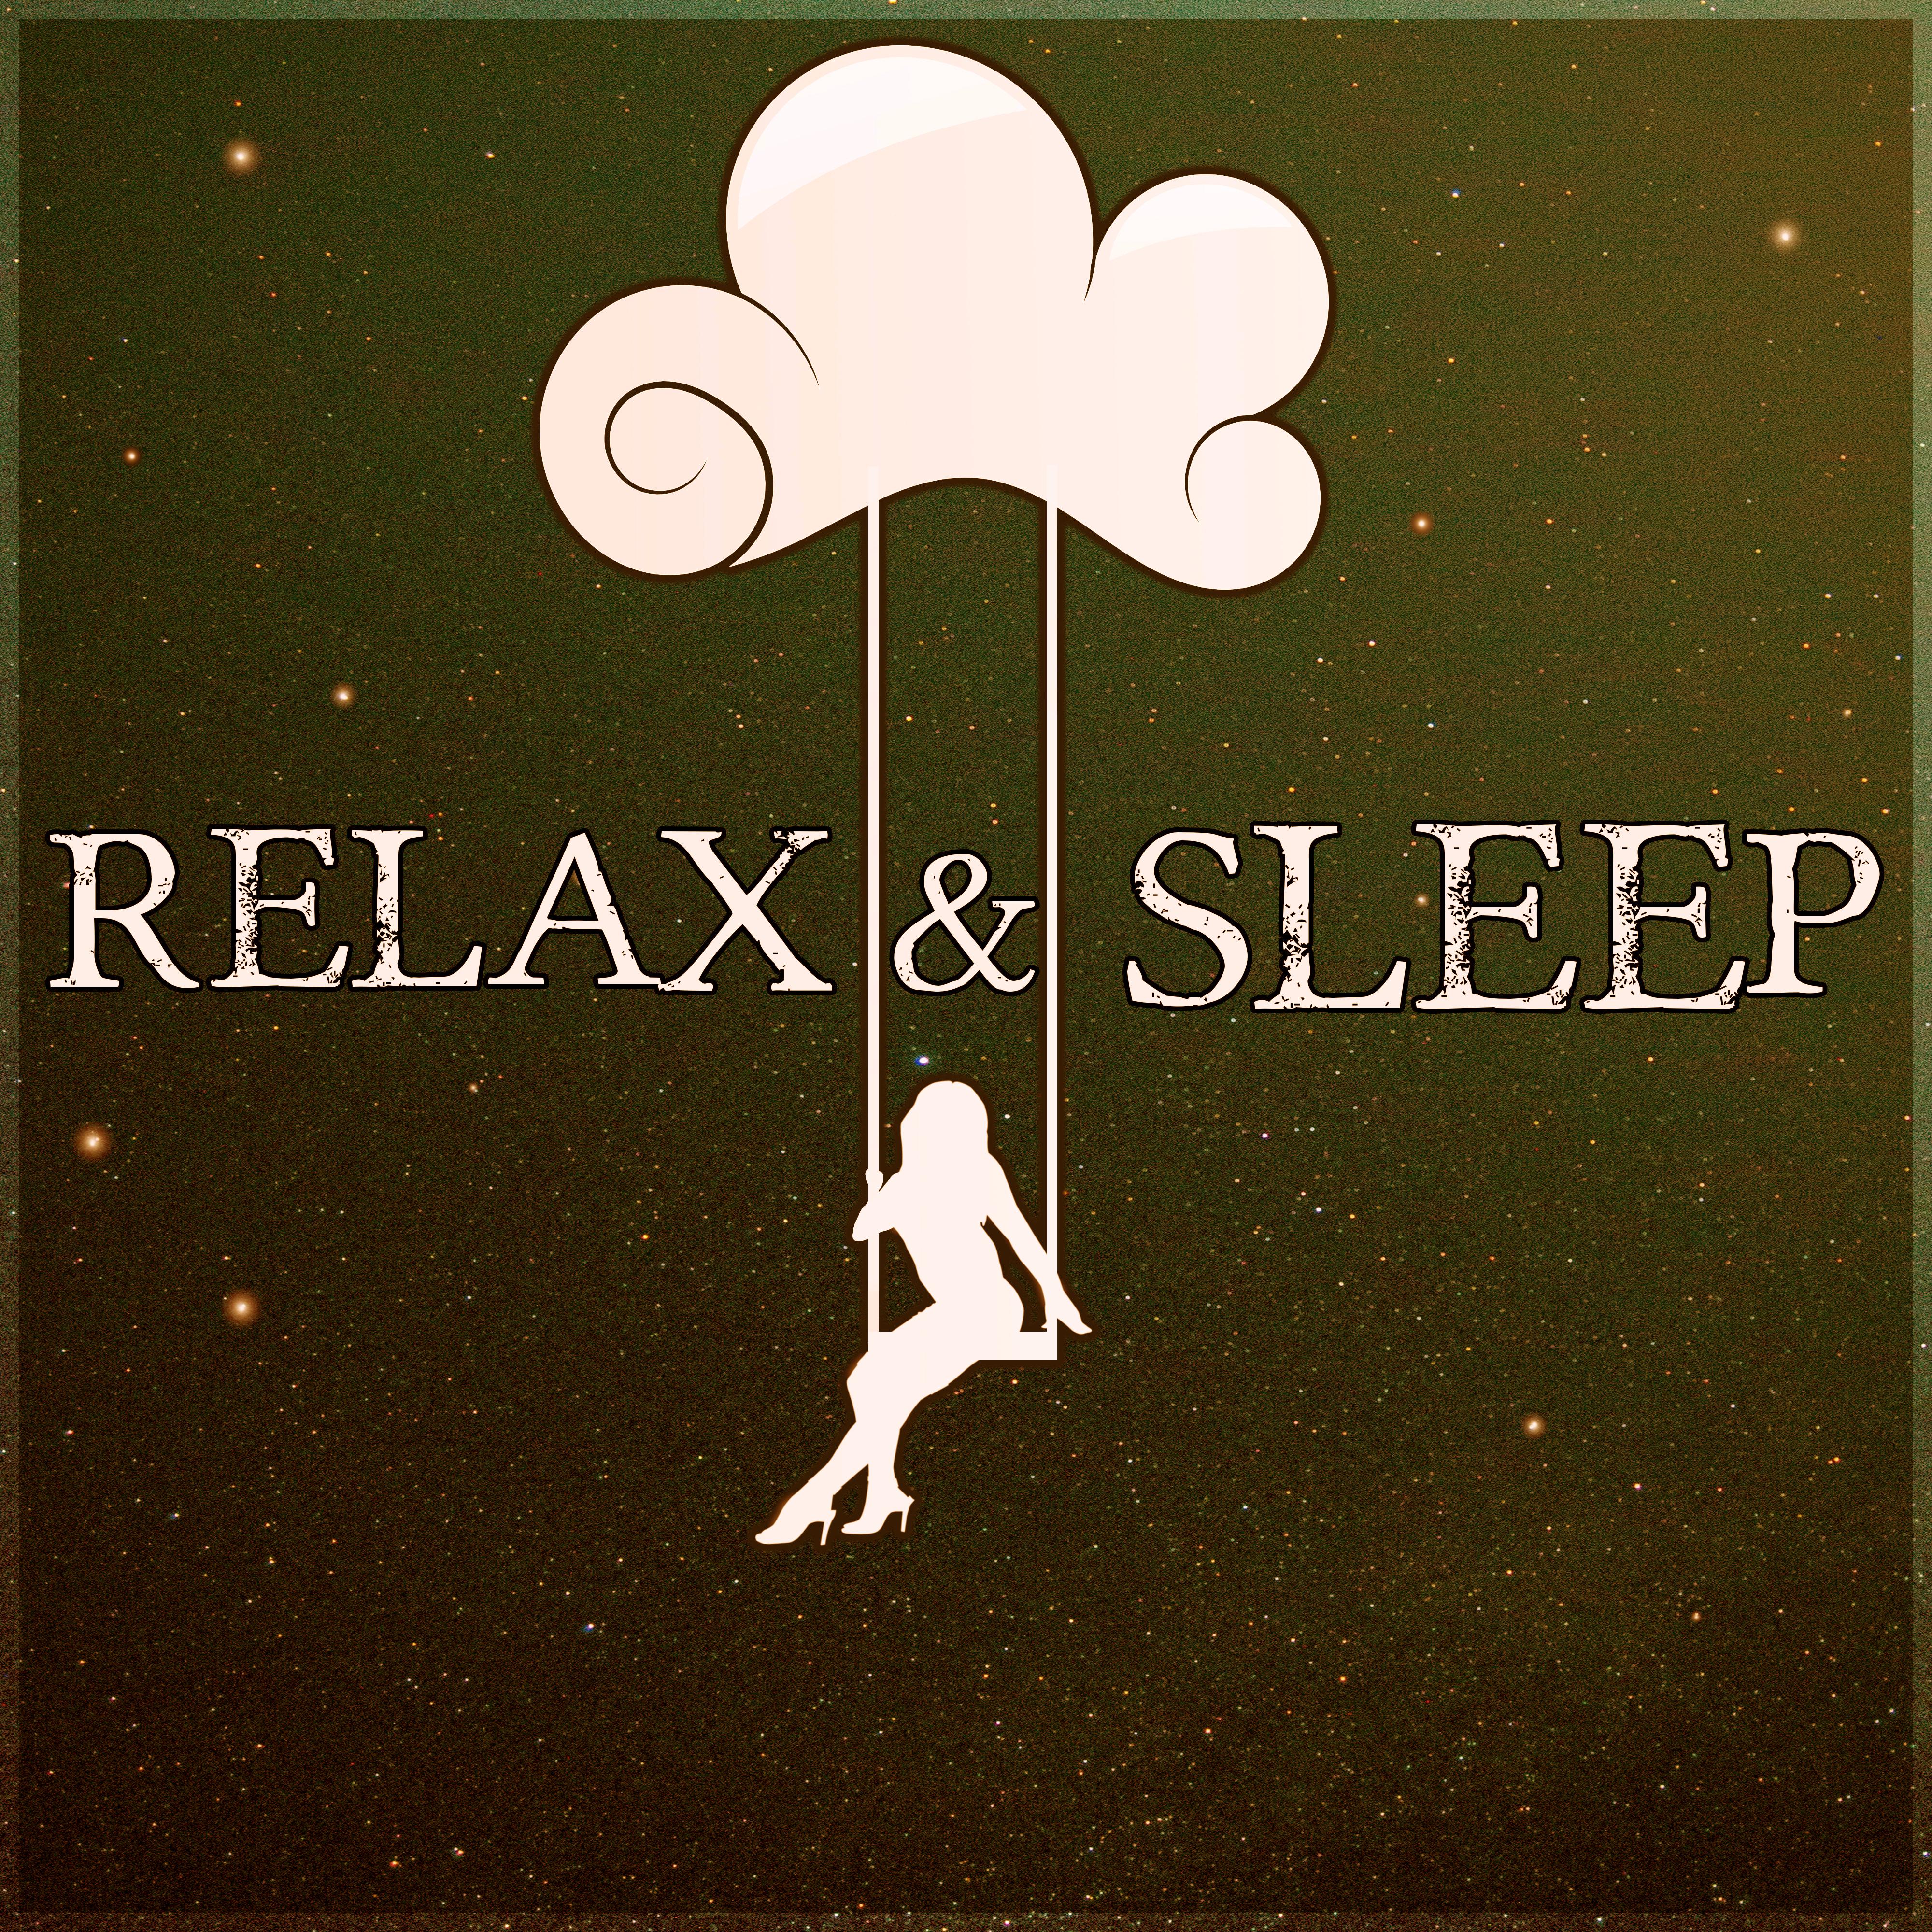 Relax & Sleep – Total Relax, Restful Sleep and Relieving Insomnia, Spa Music Background for Wellness, Massage Therapy, Deep Sleep